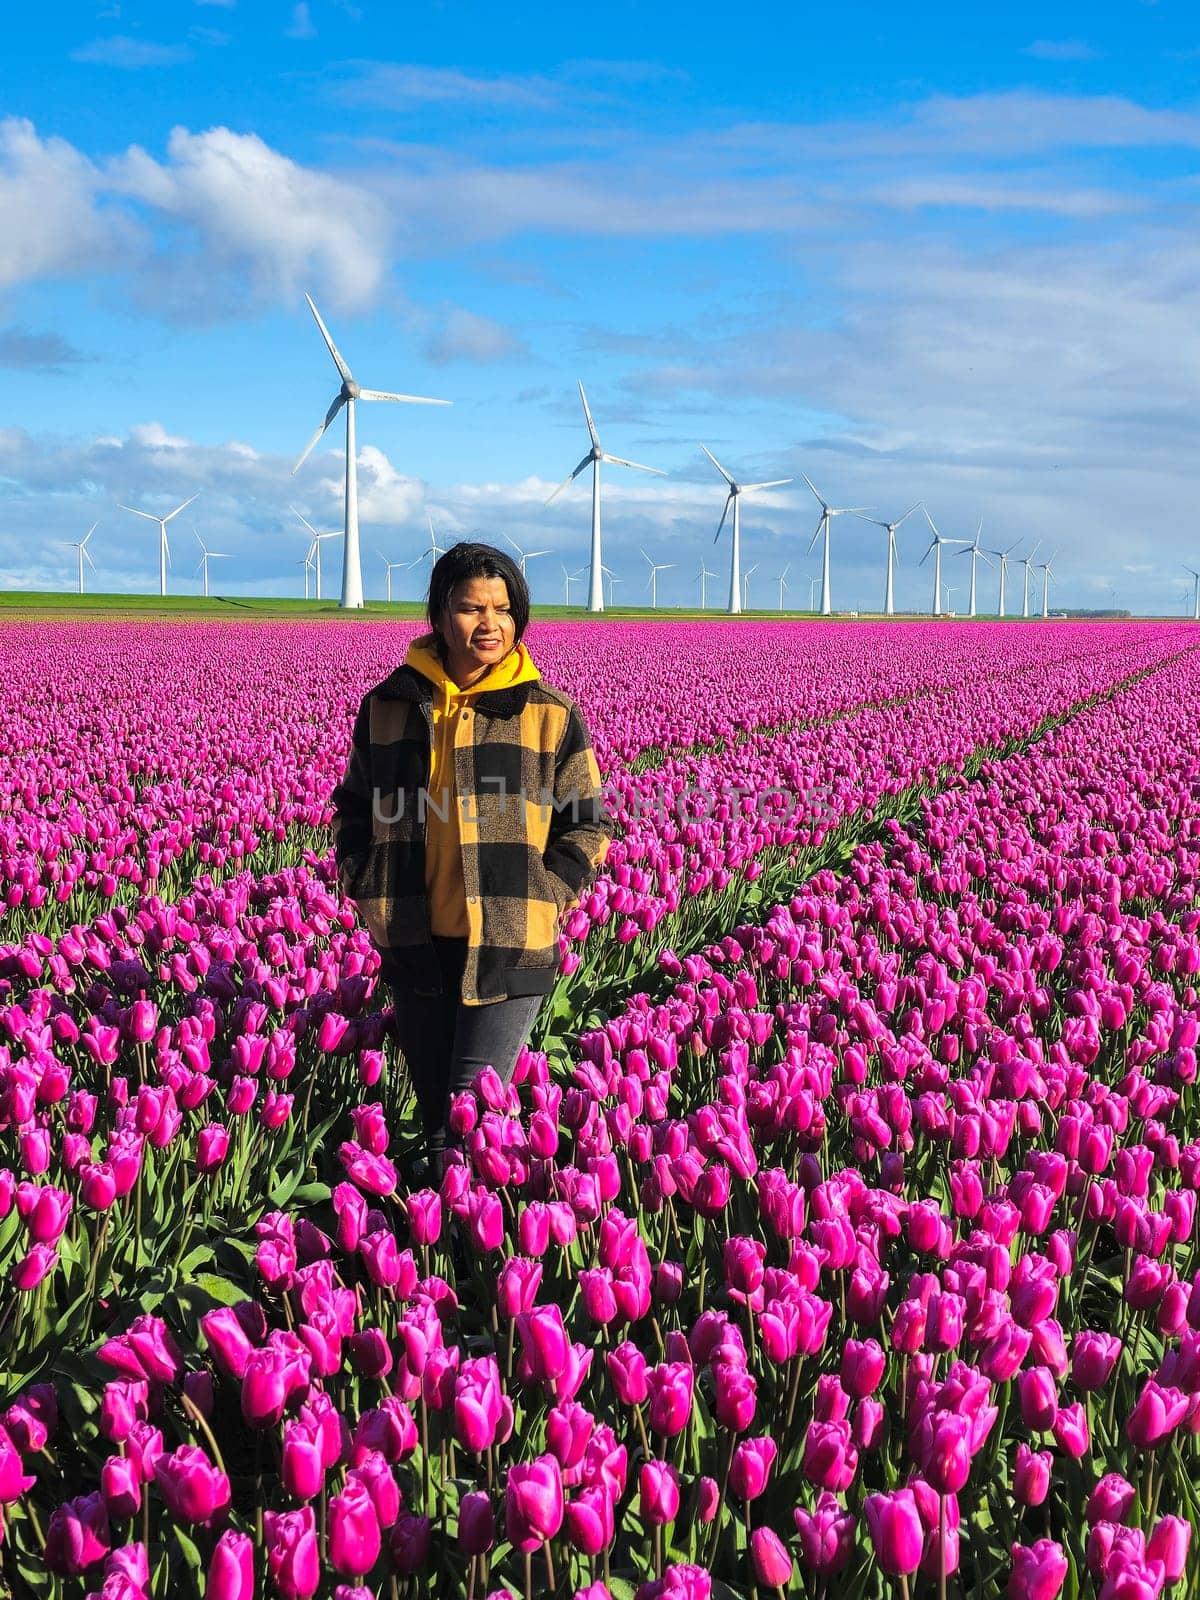 A graceful woman stands among a vibrant field of purple tulips, bathed in the soft light of a Spring day in the Netherlands.